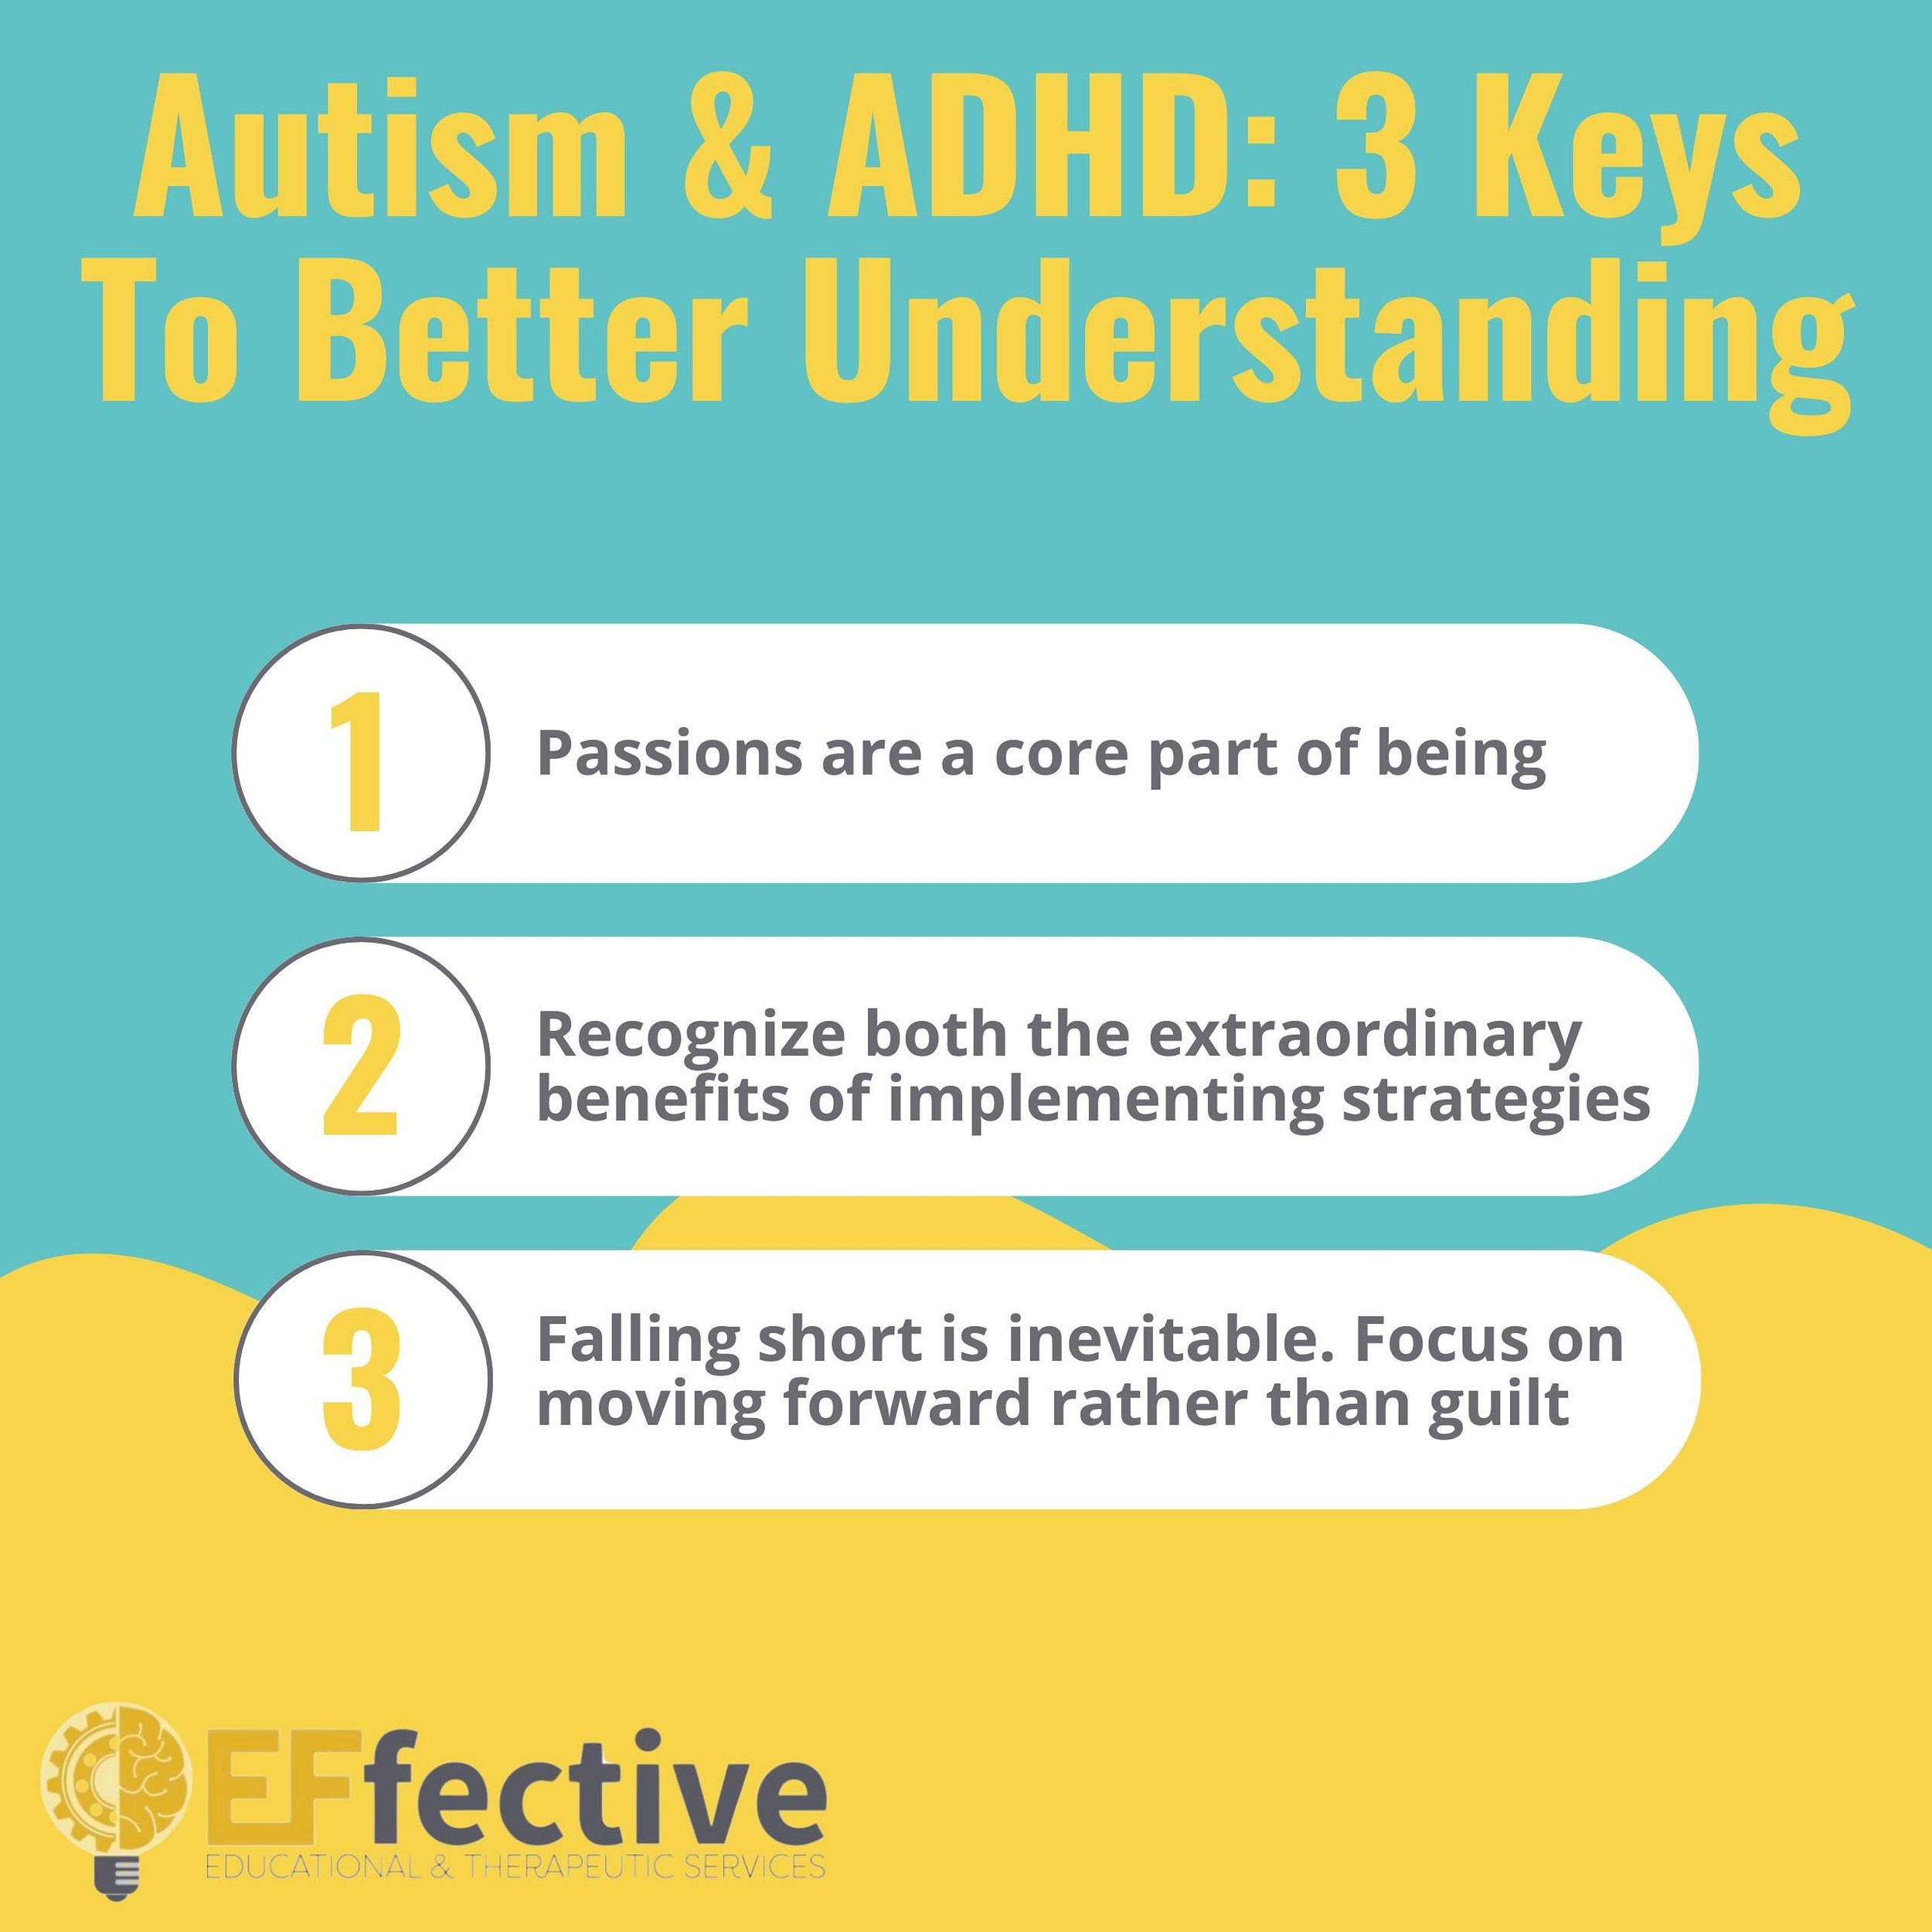 Understanding neurodiversity is crucial at EFfective Services for children with disabilities. Your child&rsquo;s diagnosis may not fully describe how their brain works. Recognizing their unique blend of autism and ADHD traits can guide personalized s